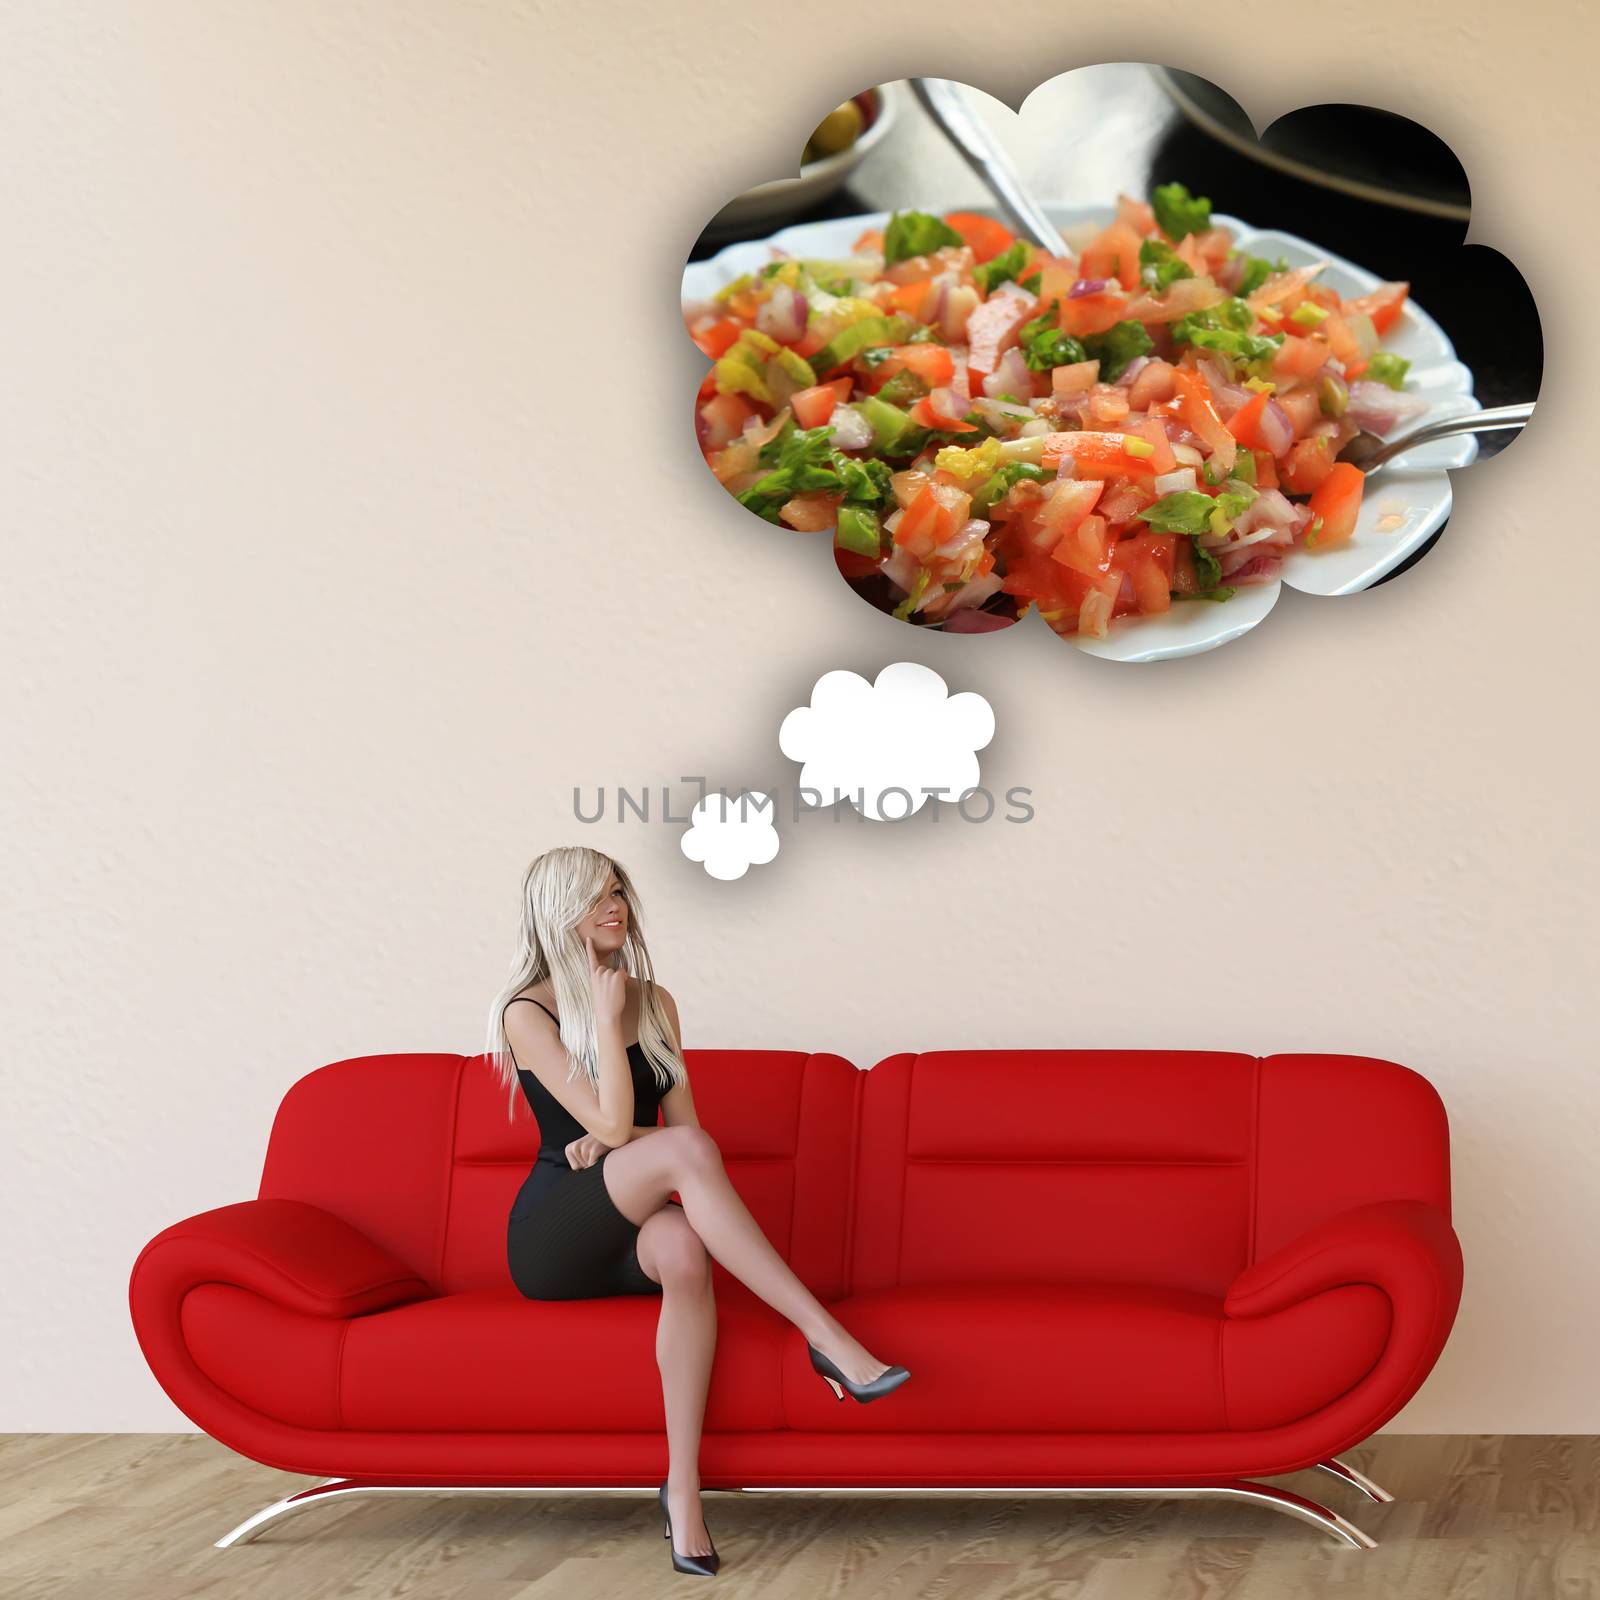 Woman Craving Moroccan Salad and Thinking About Eating Food